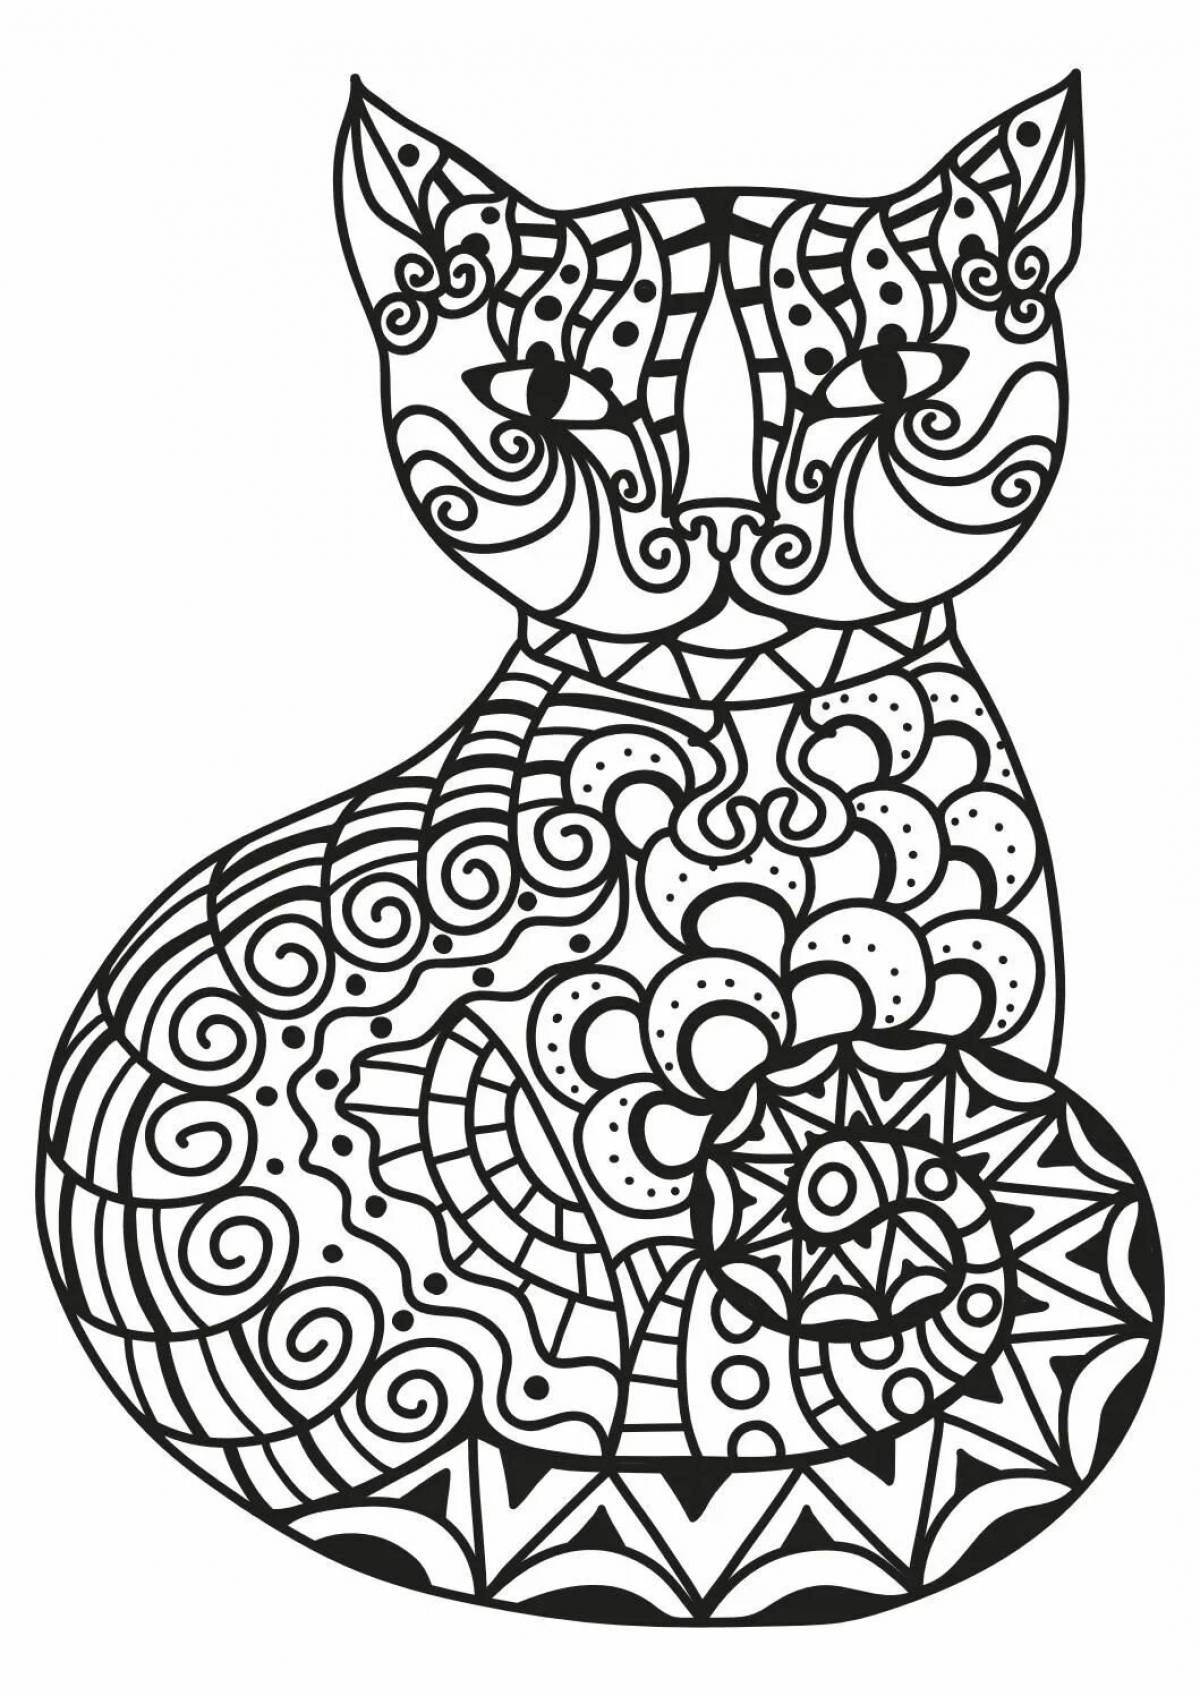 Coloring cat with a bright pattern